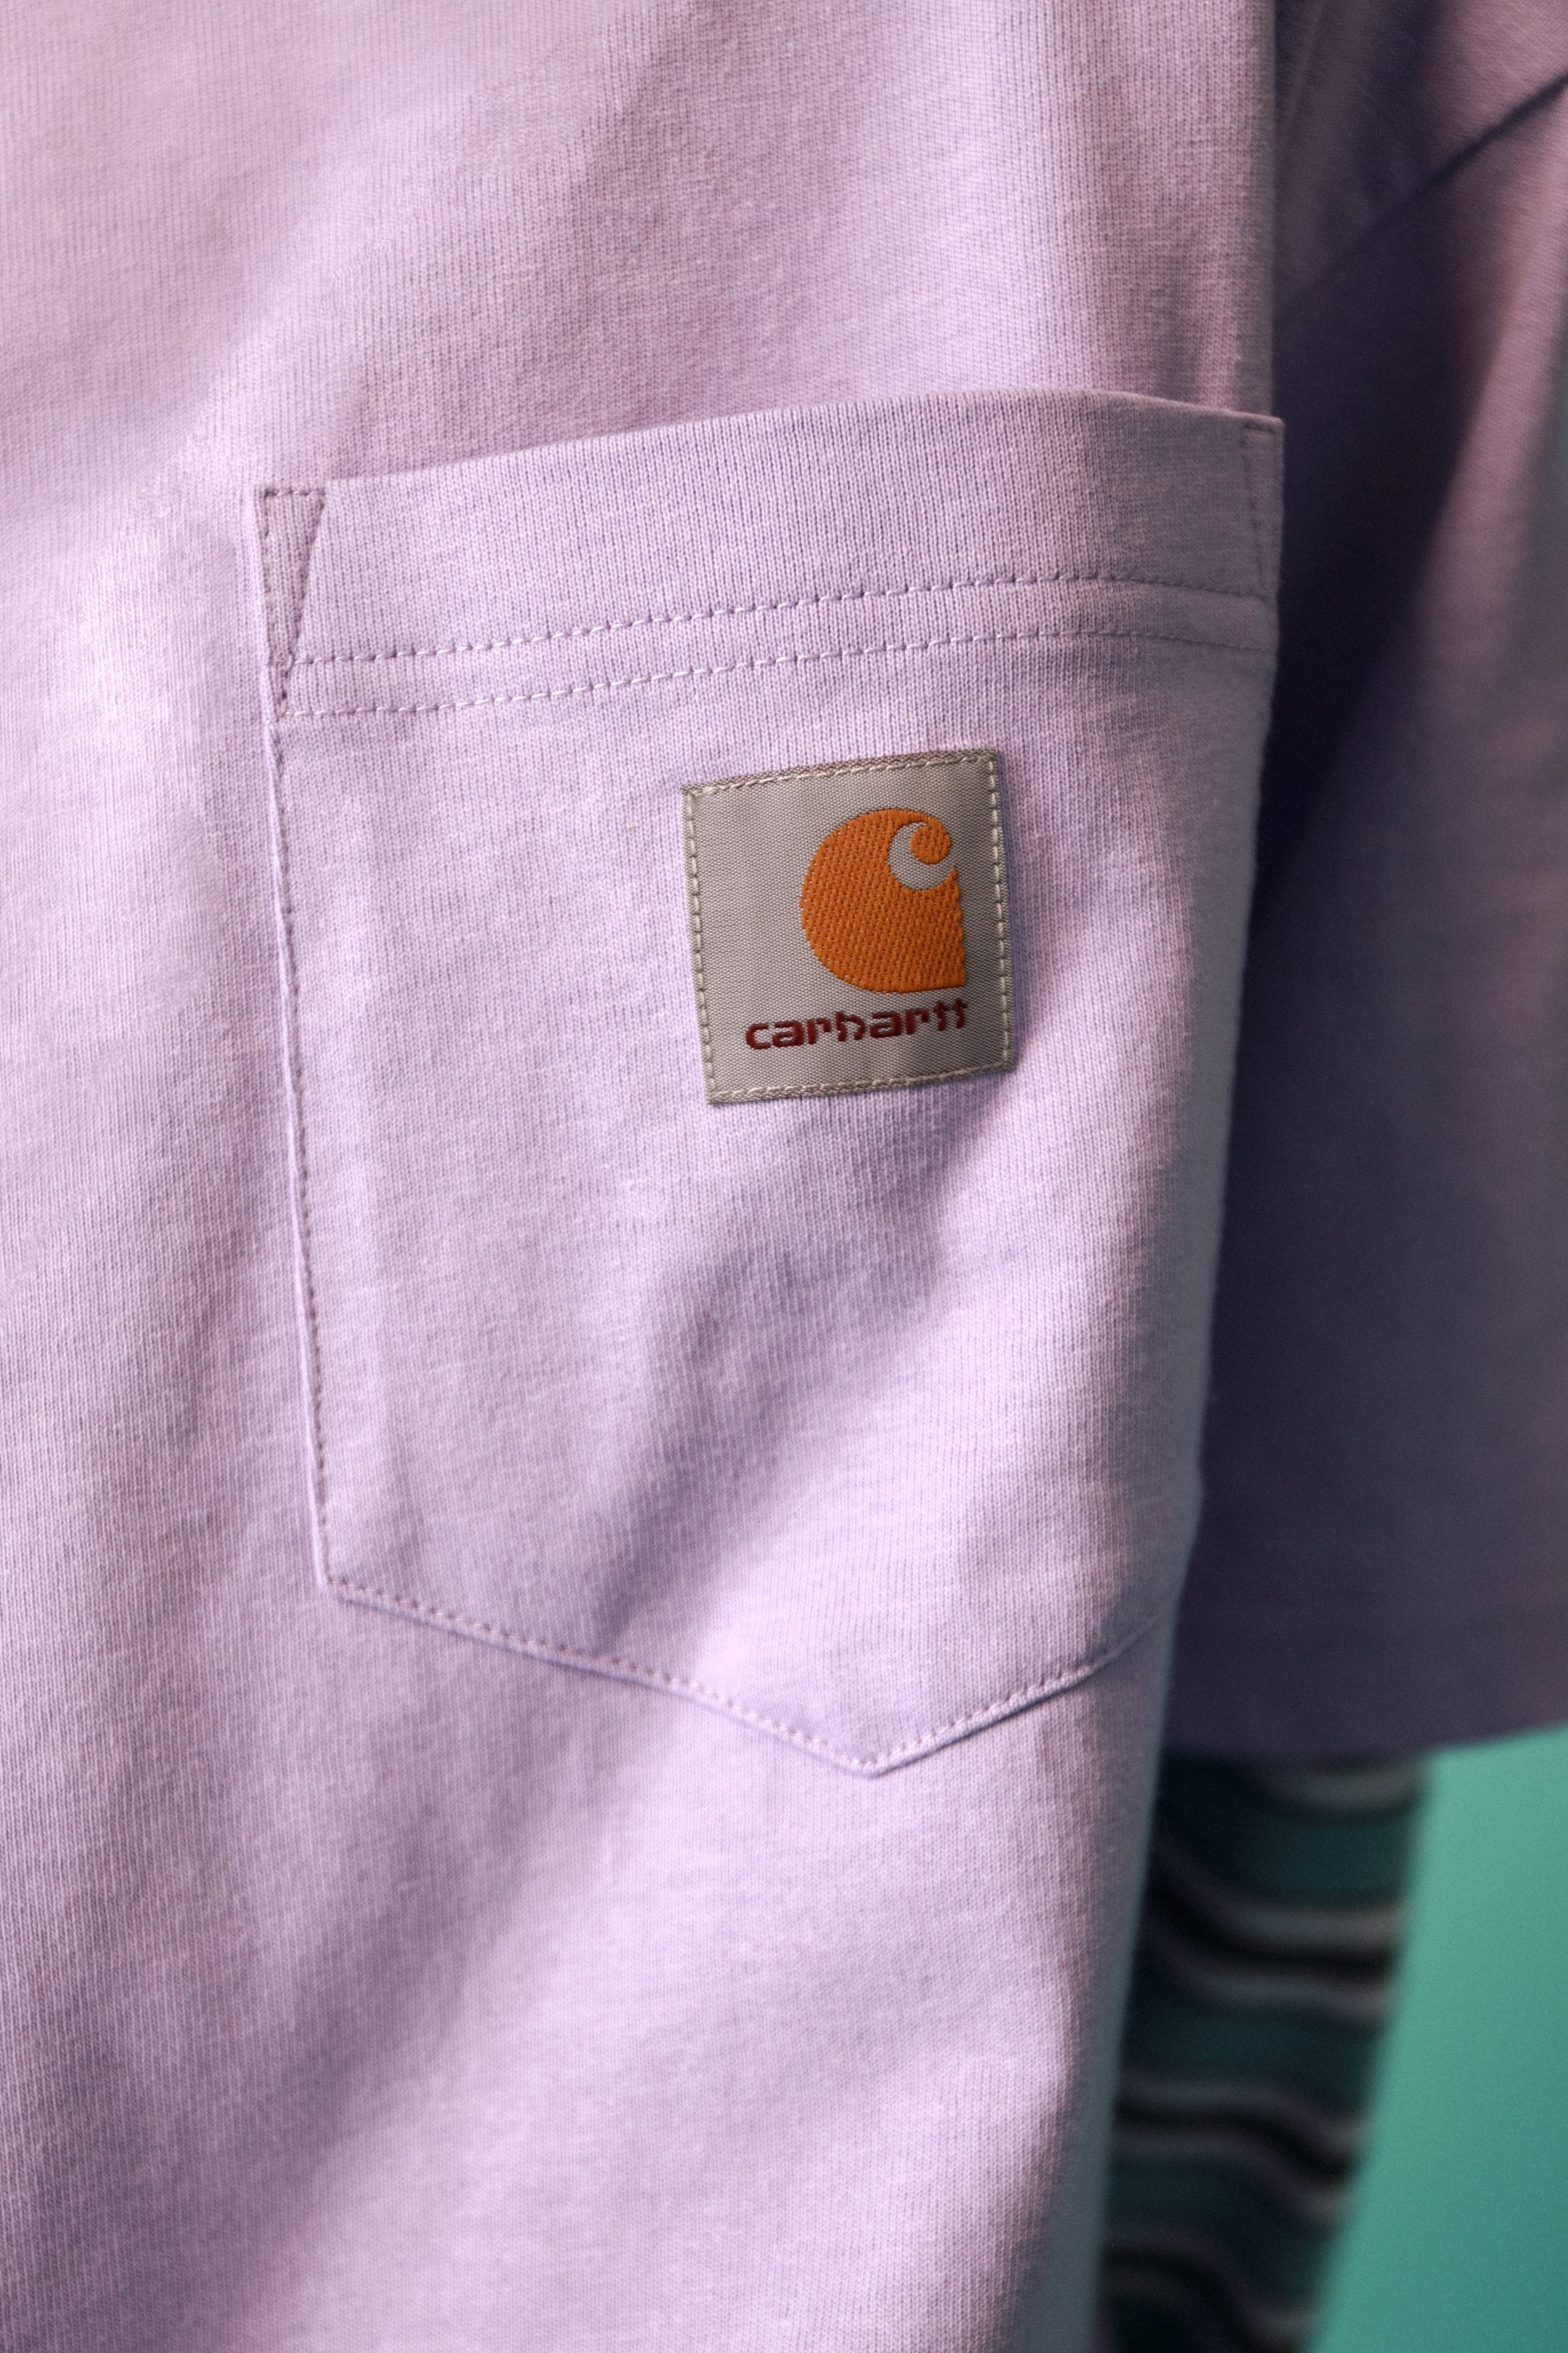 Carhartt WIP 2019 春夏「Exclusive Capsule Collection」系列登場